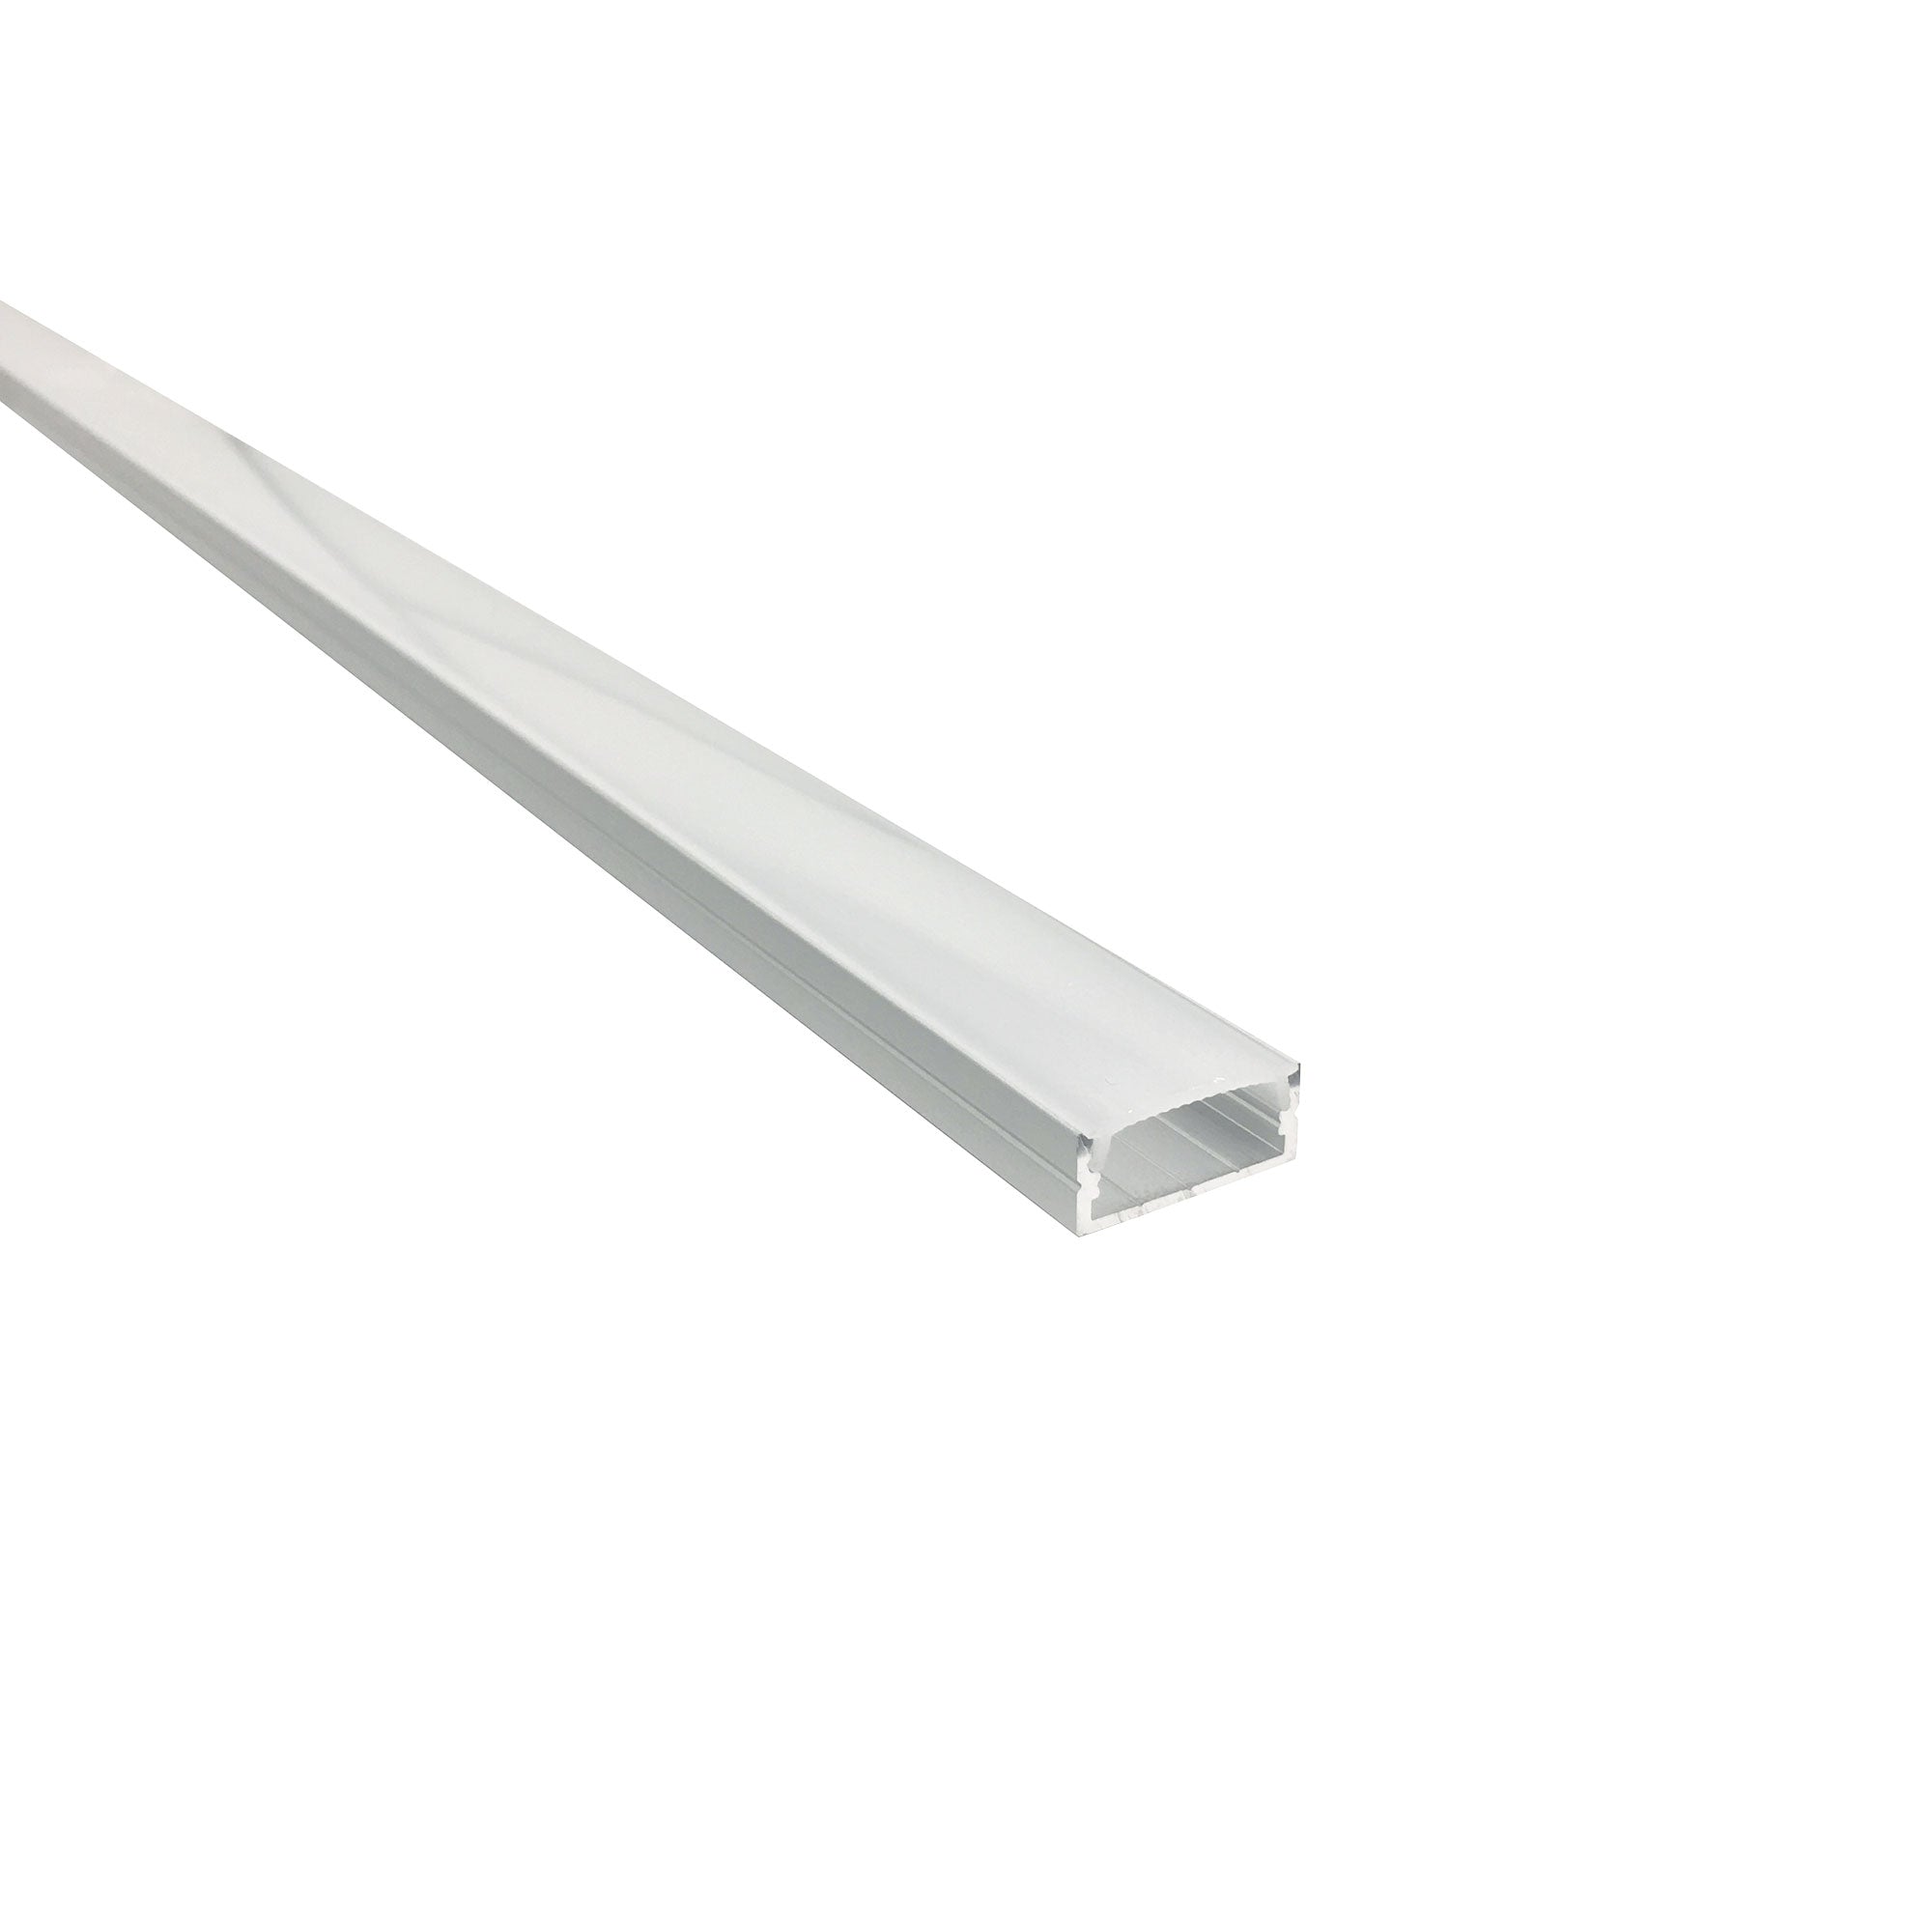 Nora Lighting NATL-C24A 4-ft Shallow Channel(Plastic Diffuser and End Caps Included) - Aluminum